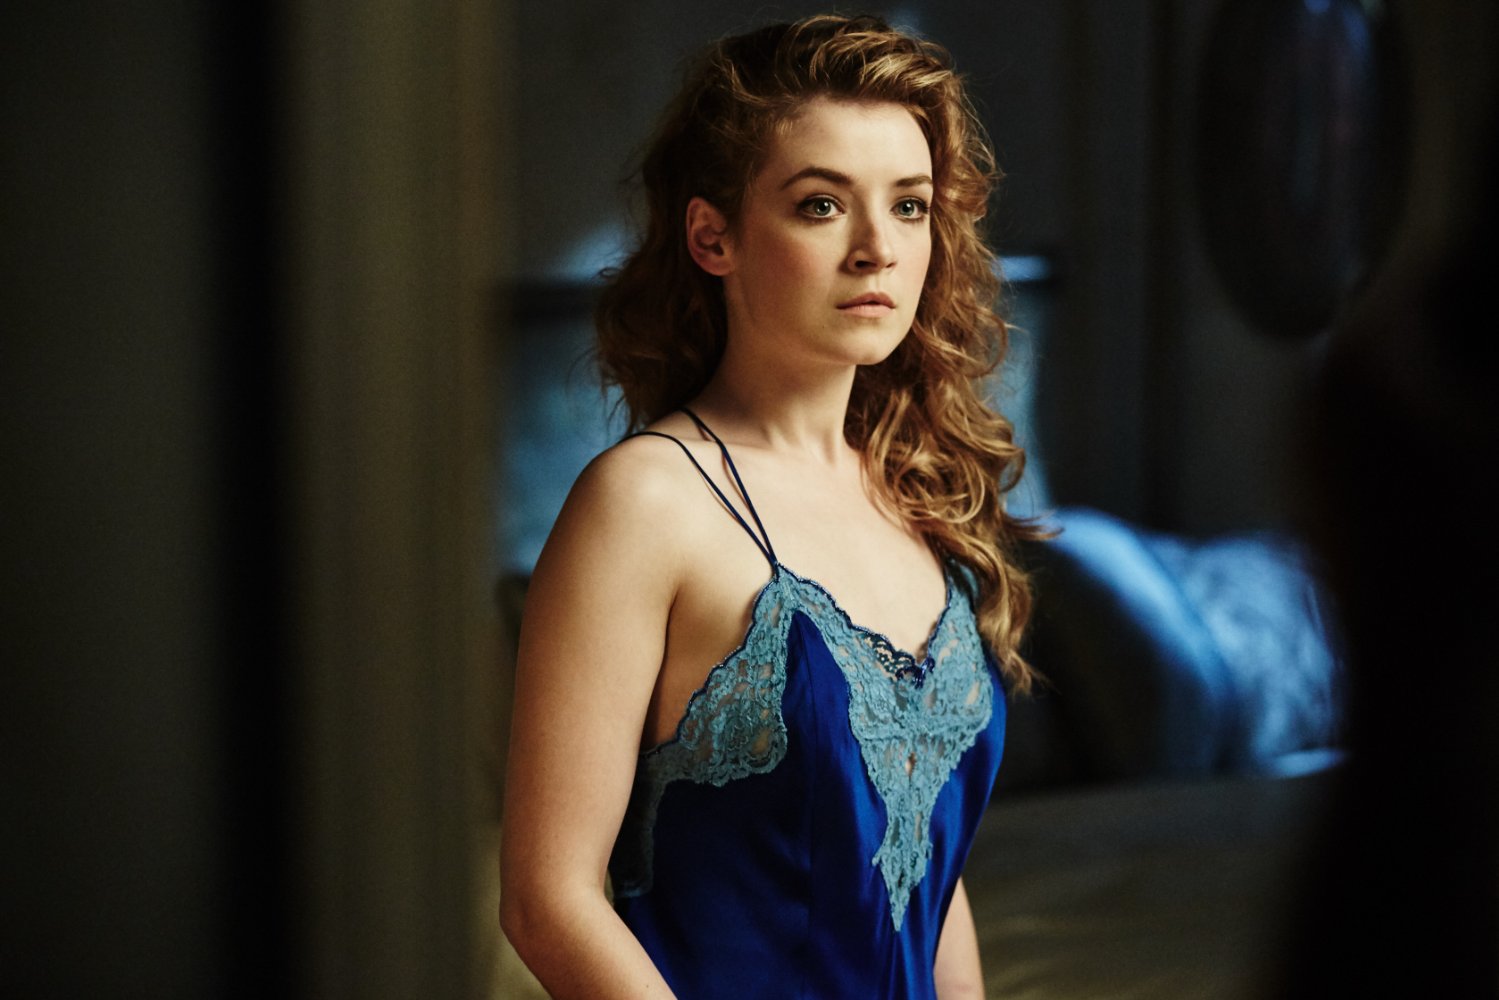 Who is Sarah Bolger Dating?